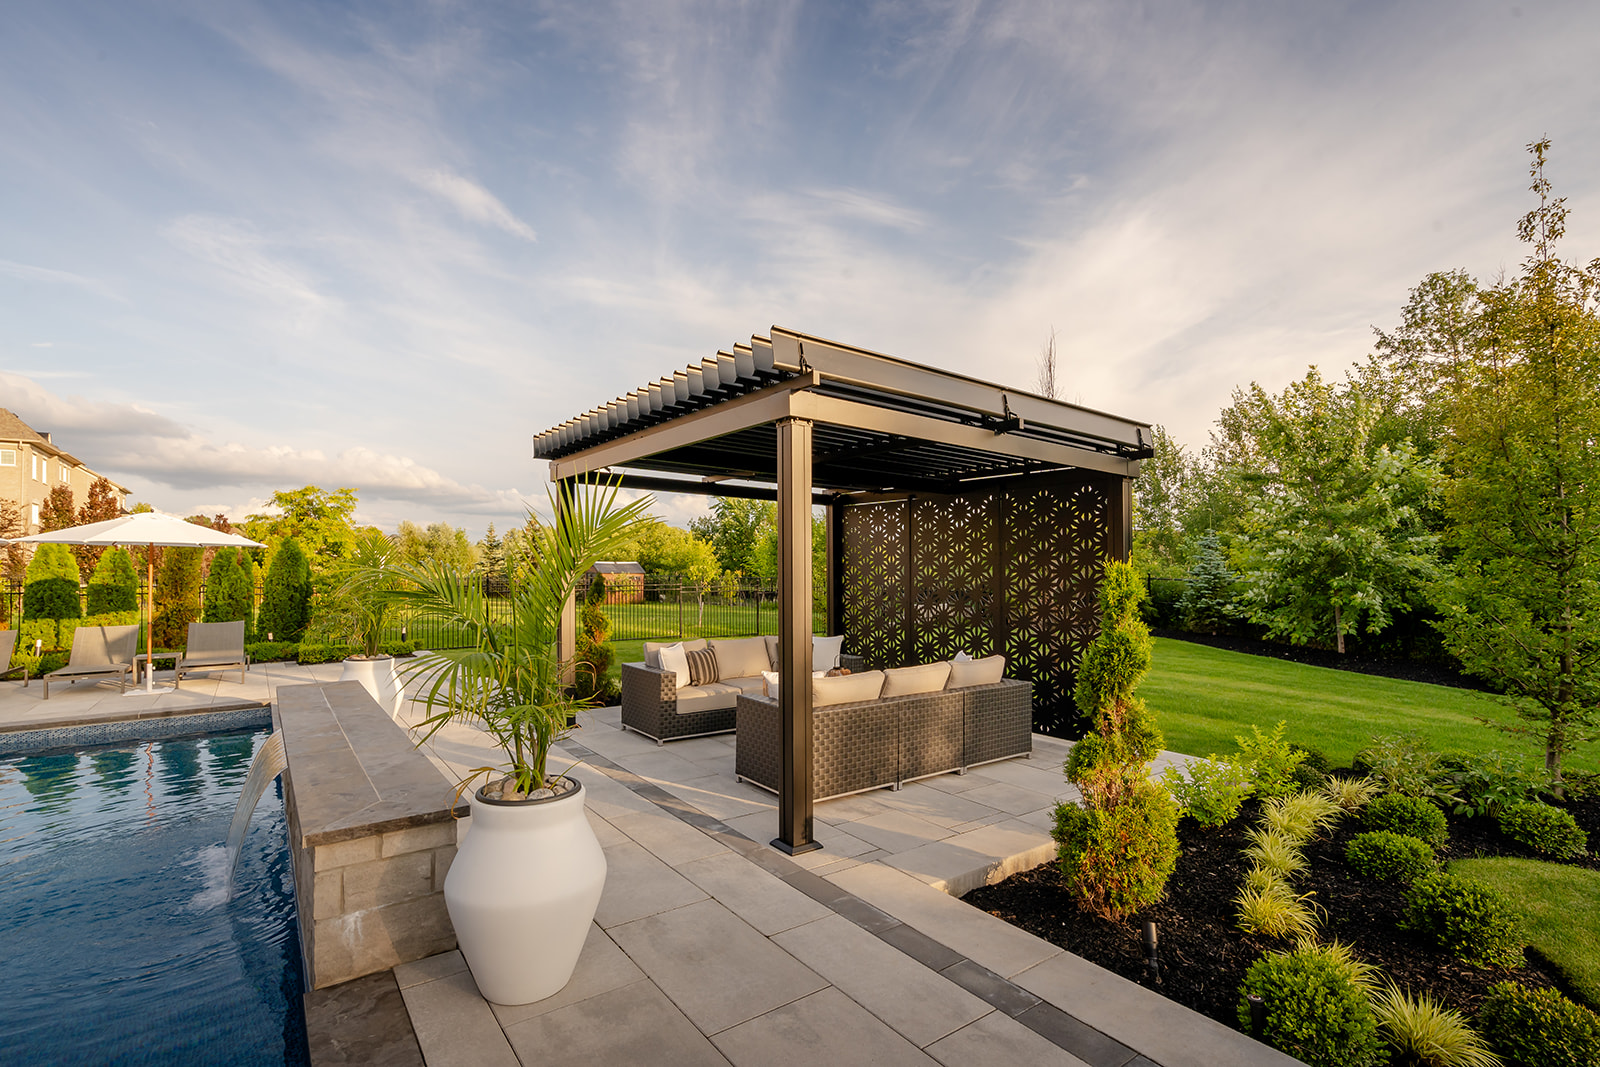 A metal gazebo with an outdoor patio set underneath, beside an inground pool.